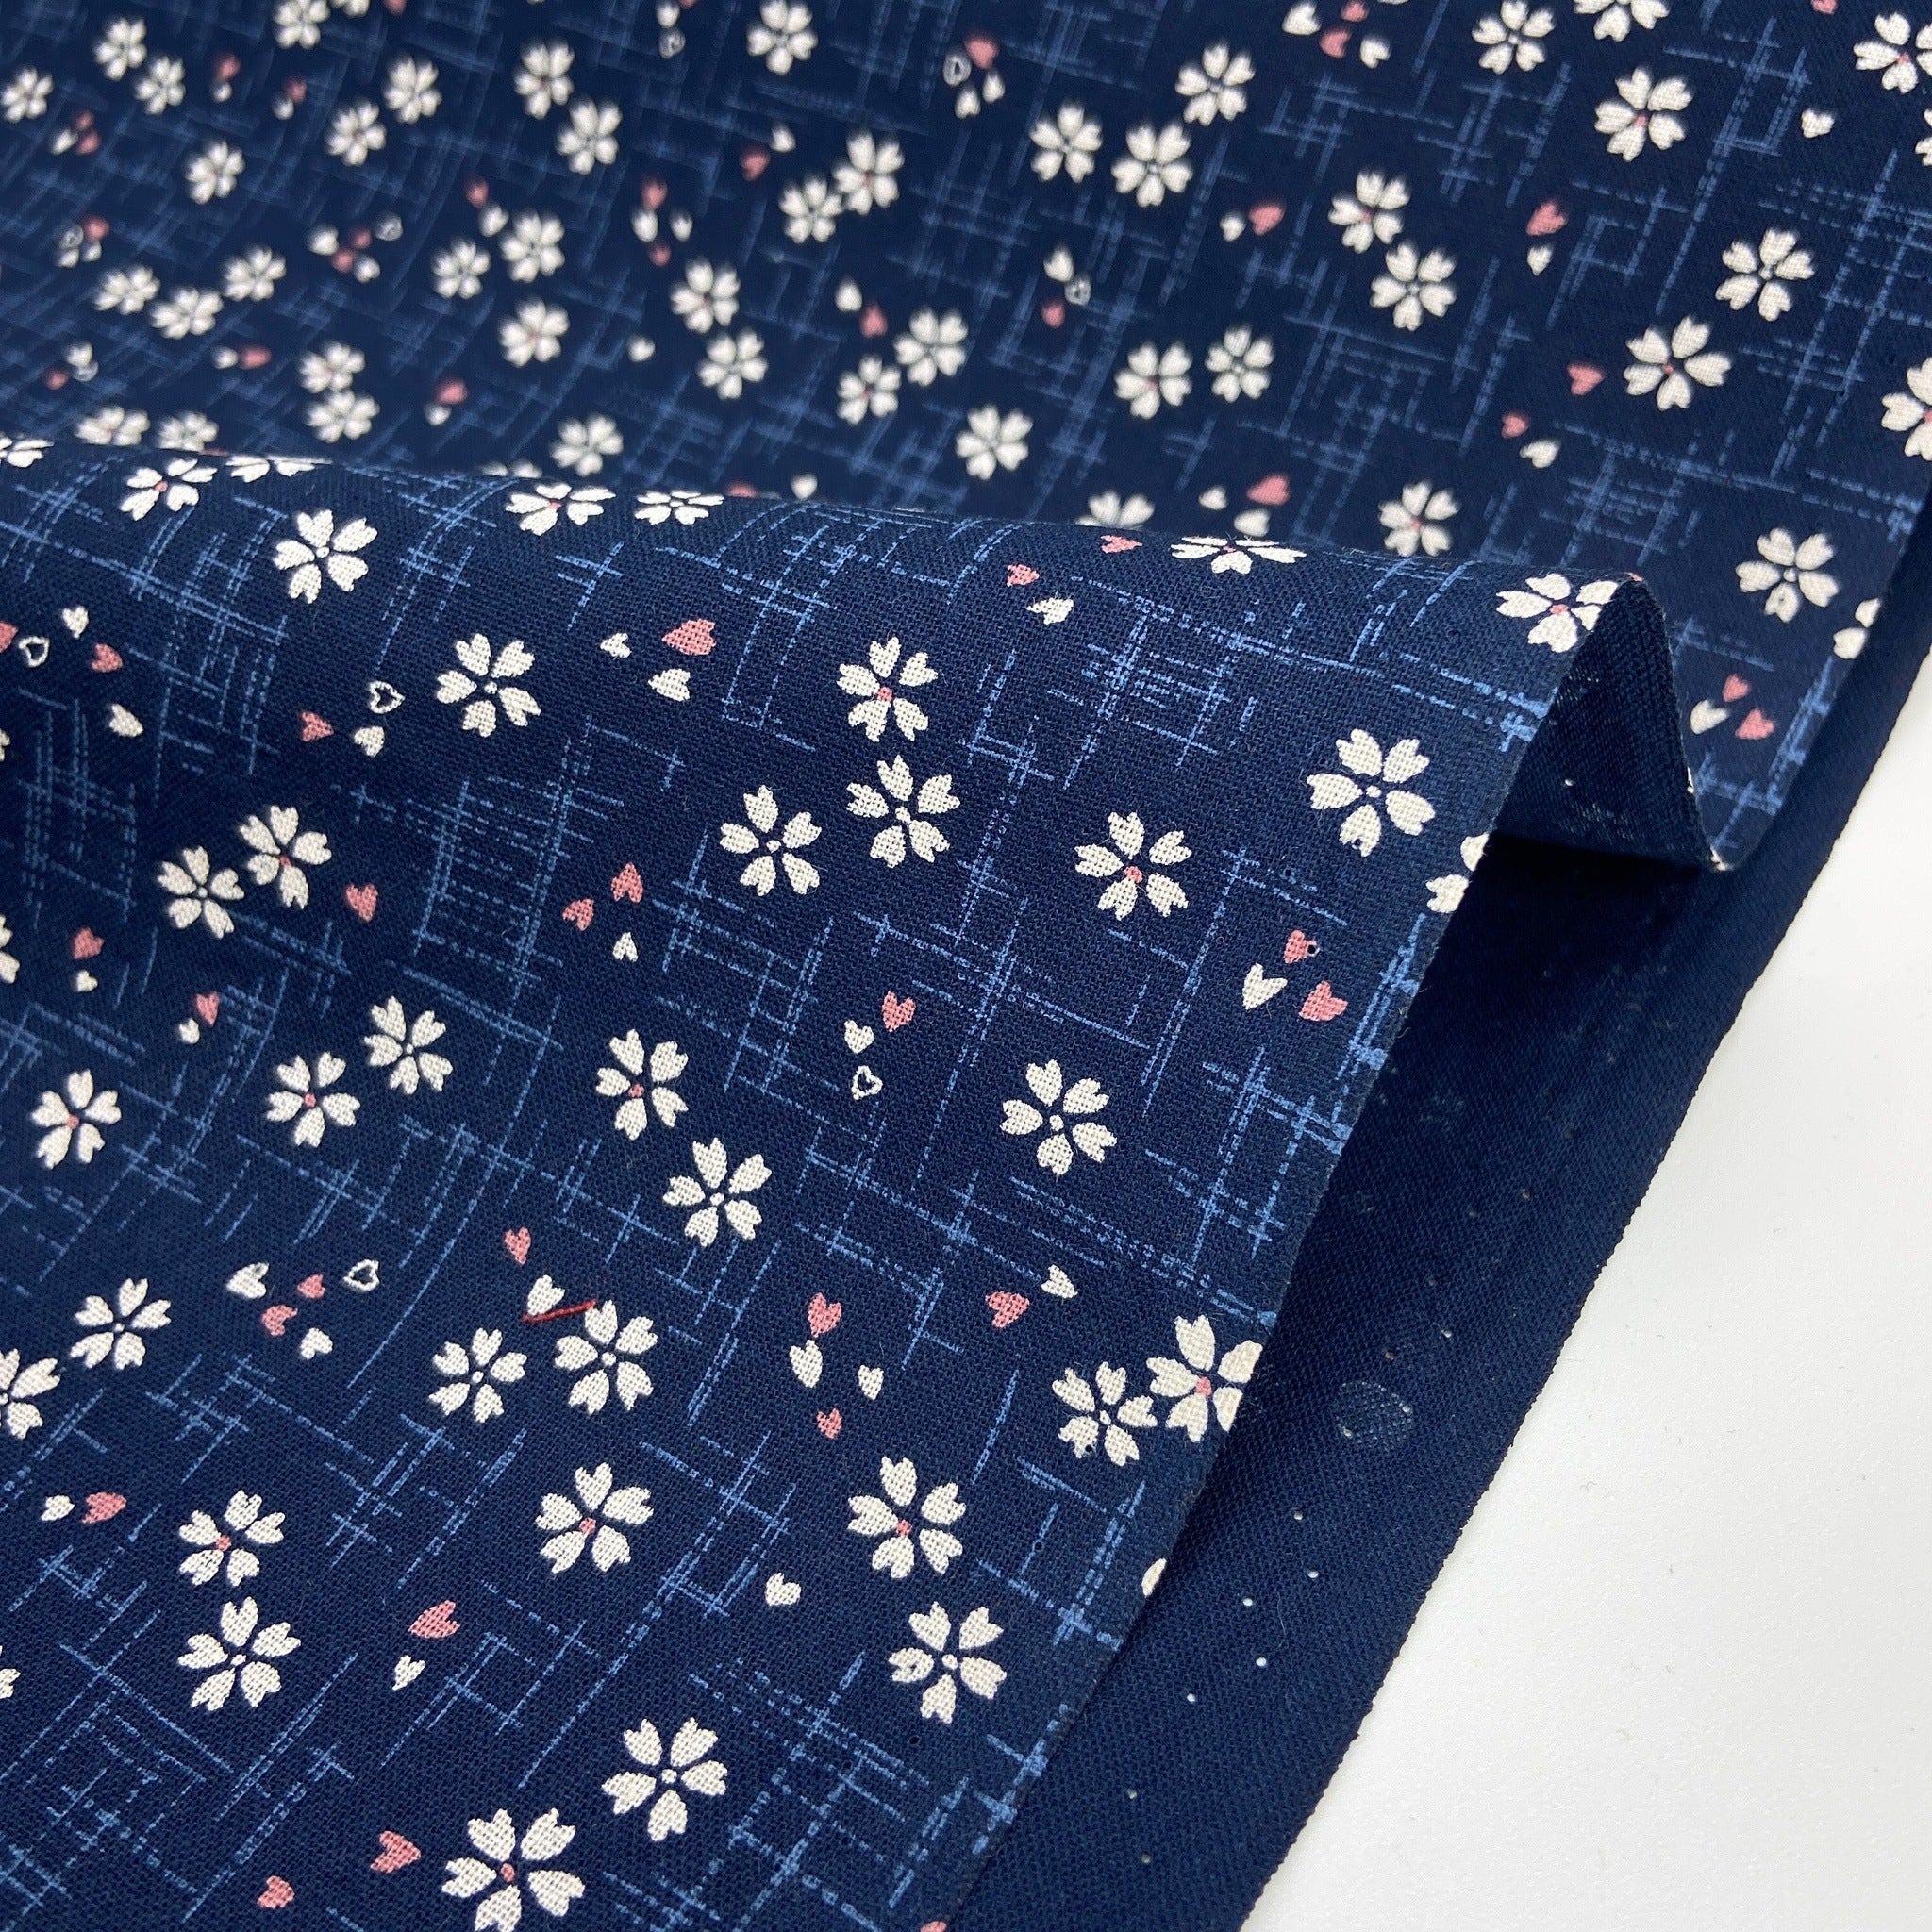 Japanese Cotton Sheeting Print - Cherry Blossom with Falling Petals Navy